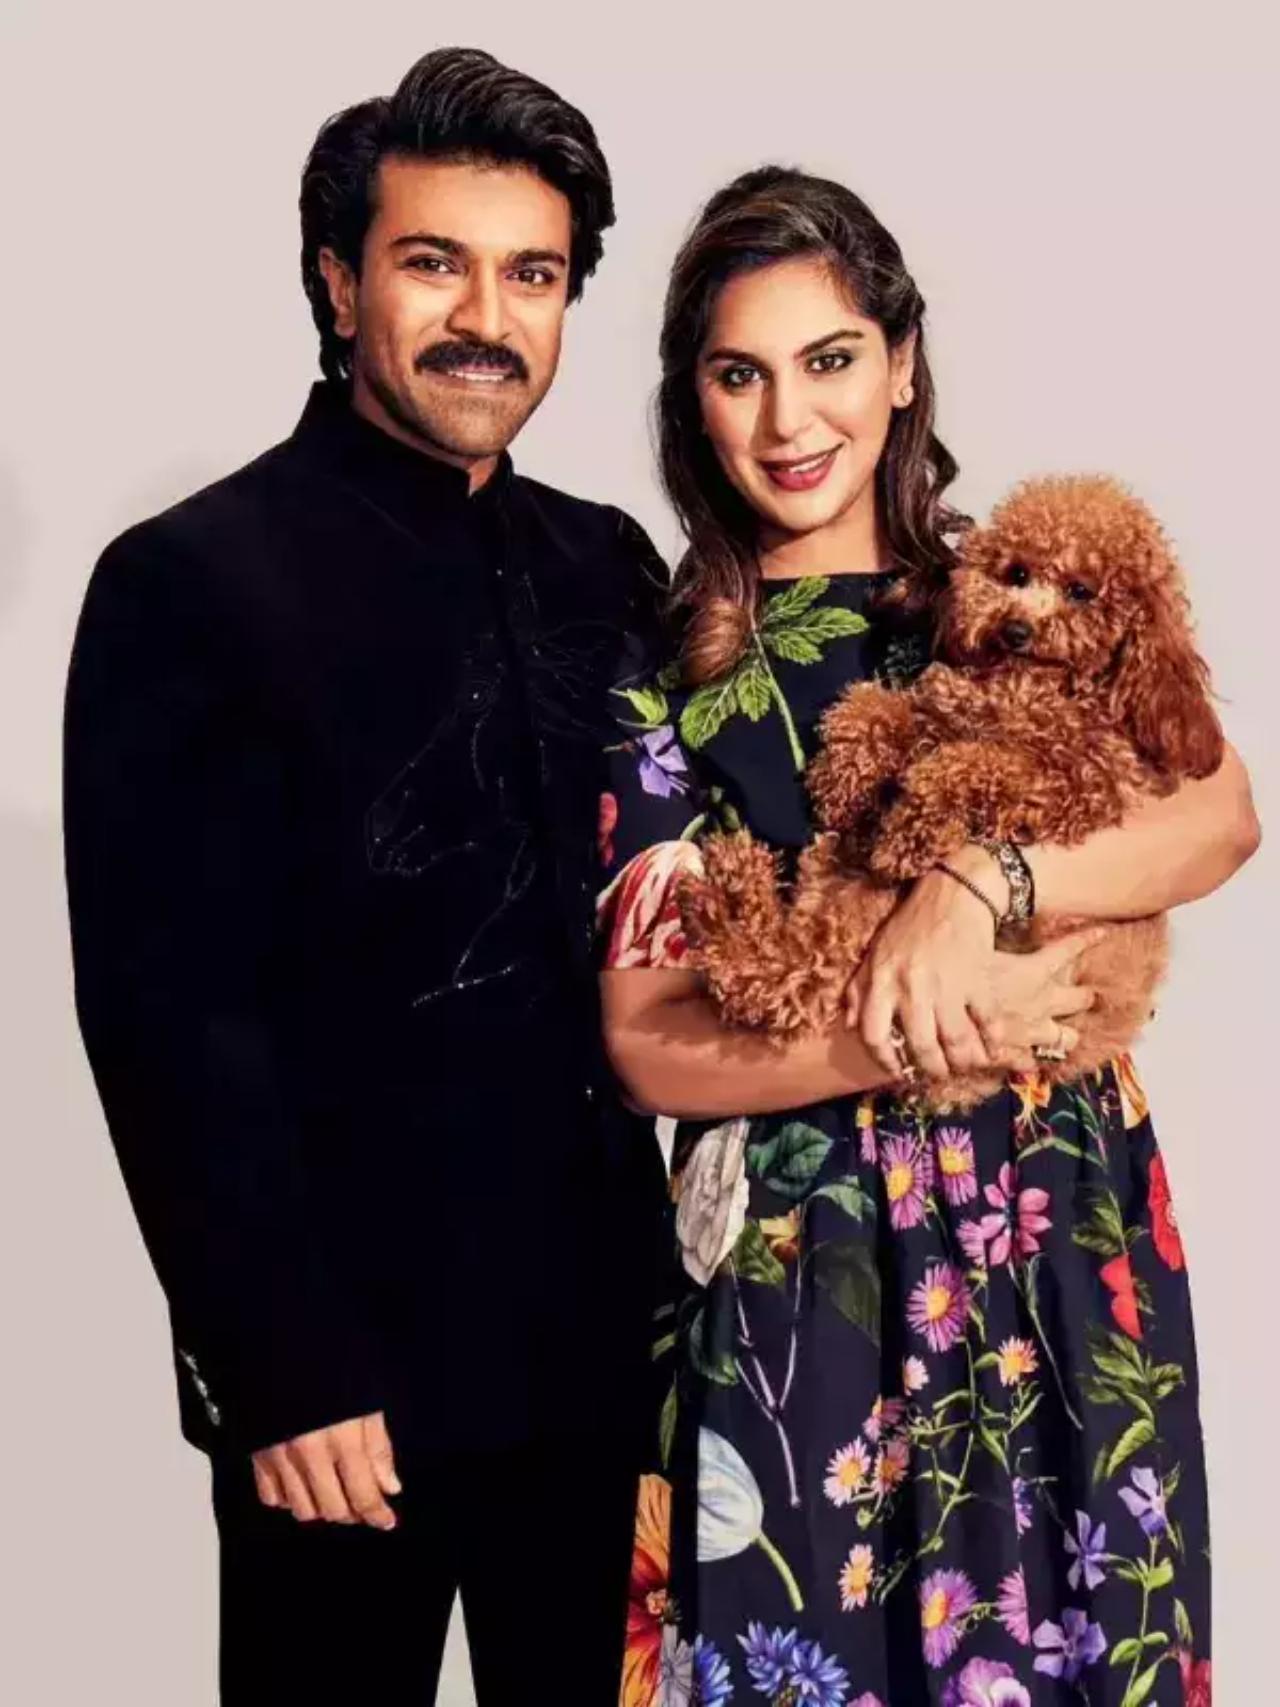 Ram Charan and Upasana also have an adorable pet dog named 'Rhyme' and plays his role as furry family member perfectly